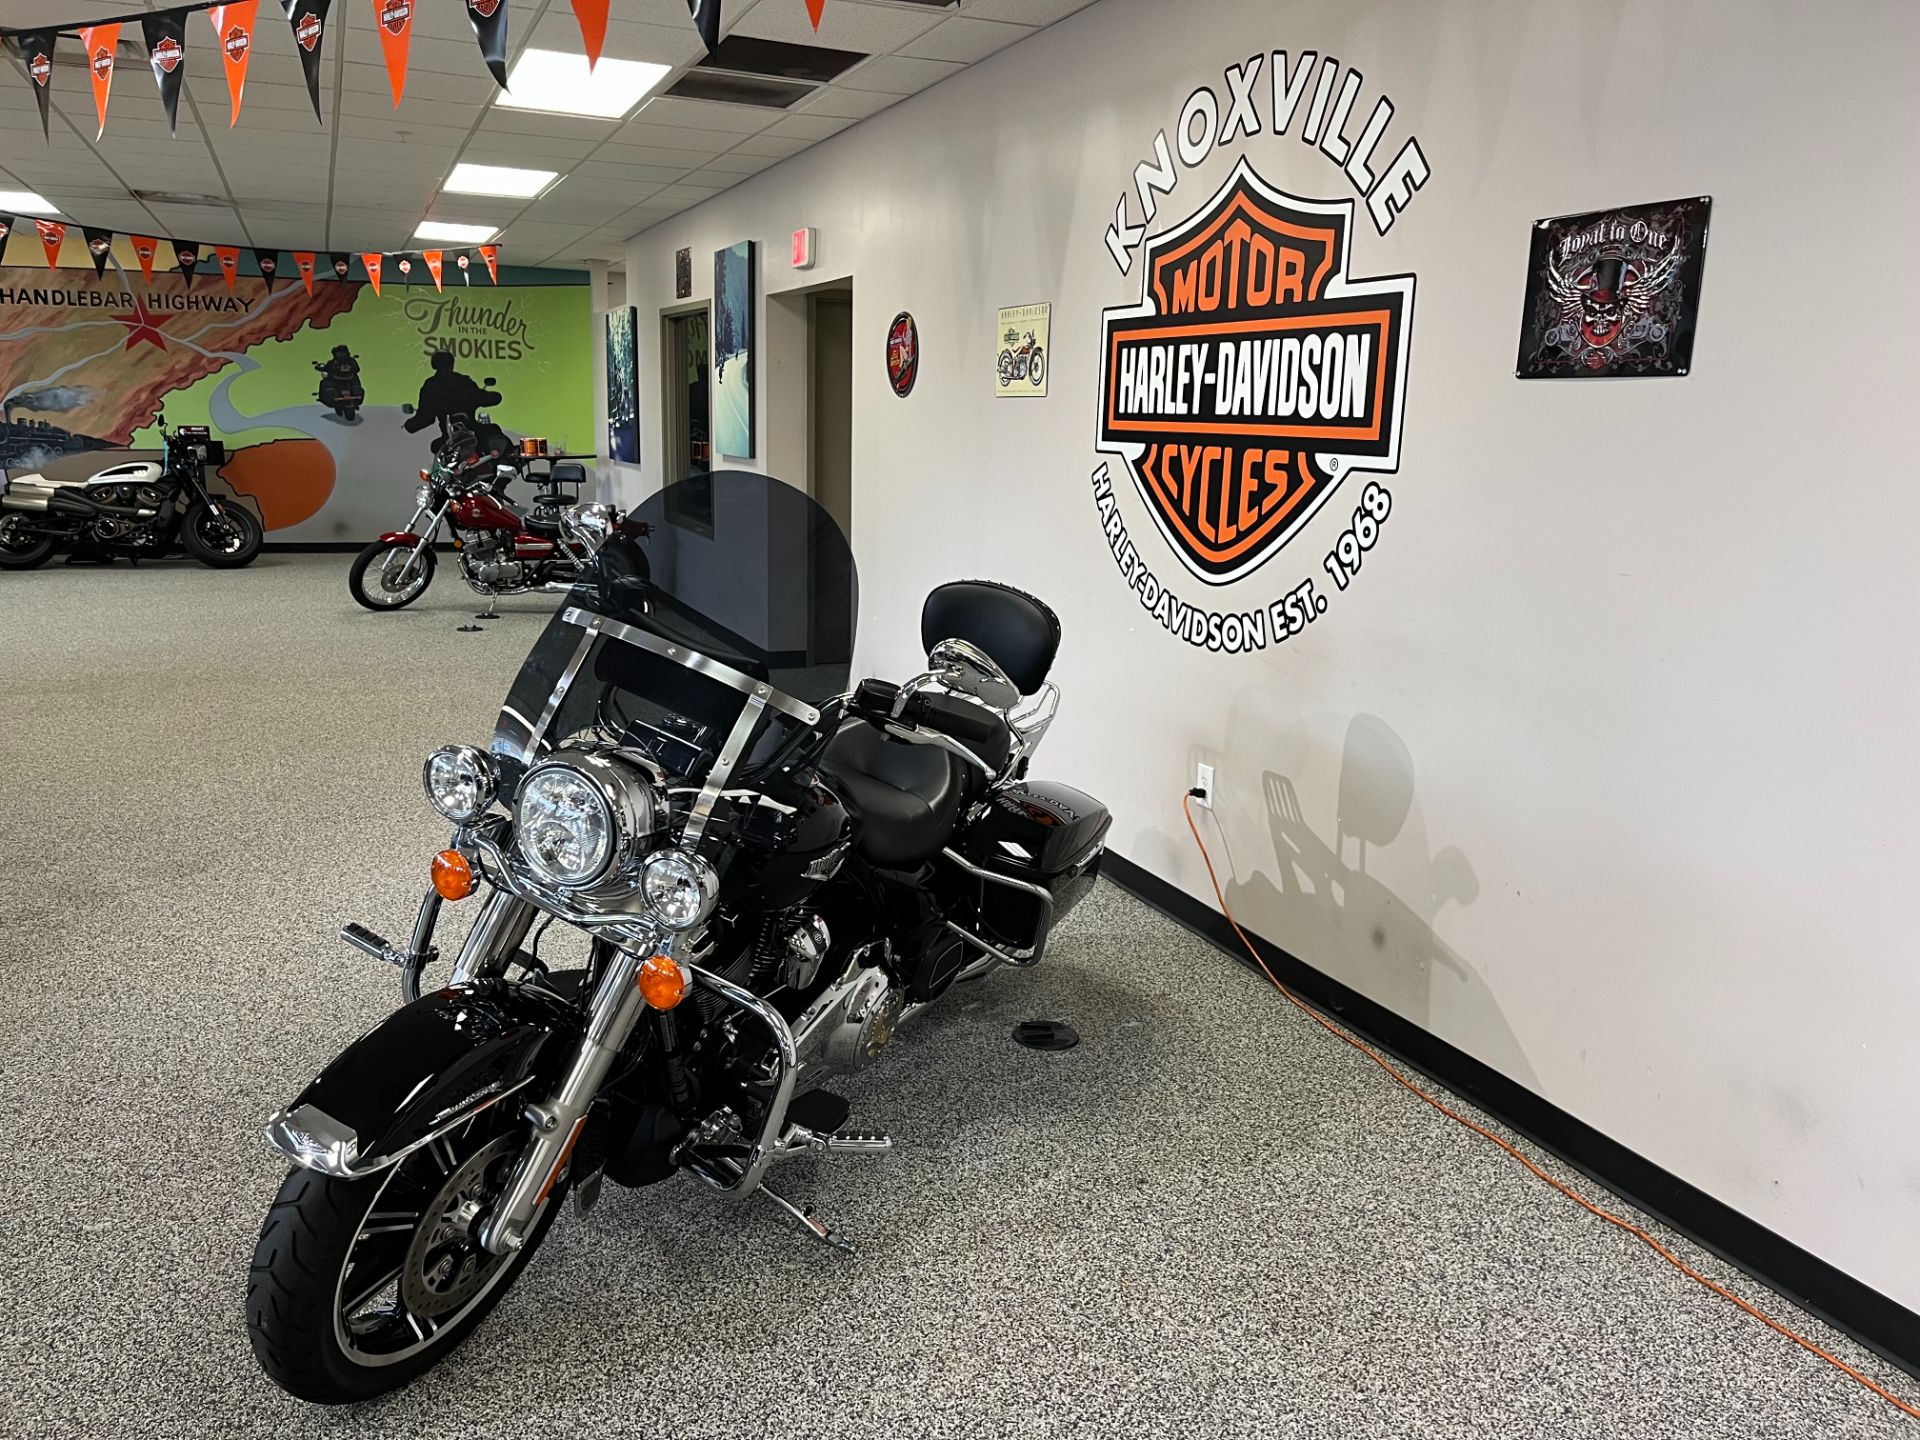 2020 Harley-Davidson ROAD KING in Knoxville, Tennessee - Photo 4